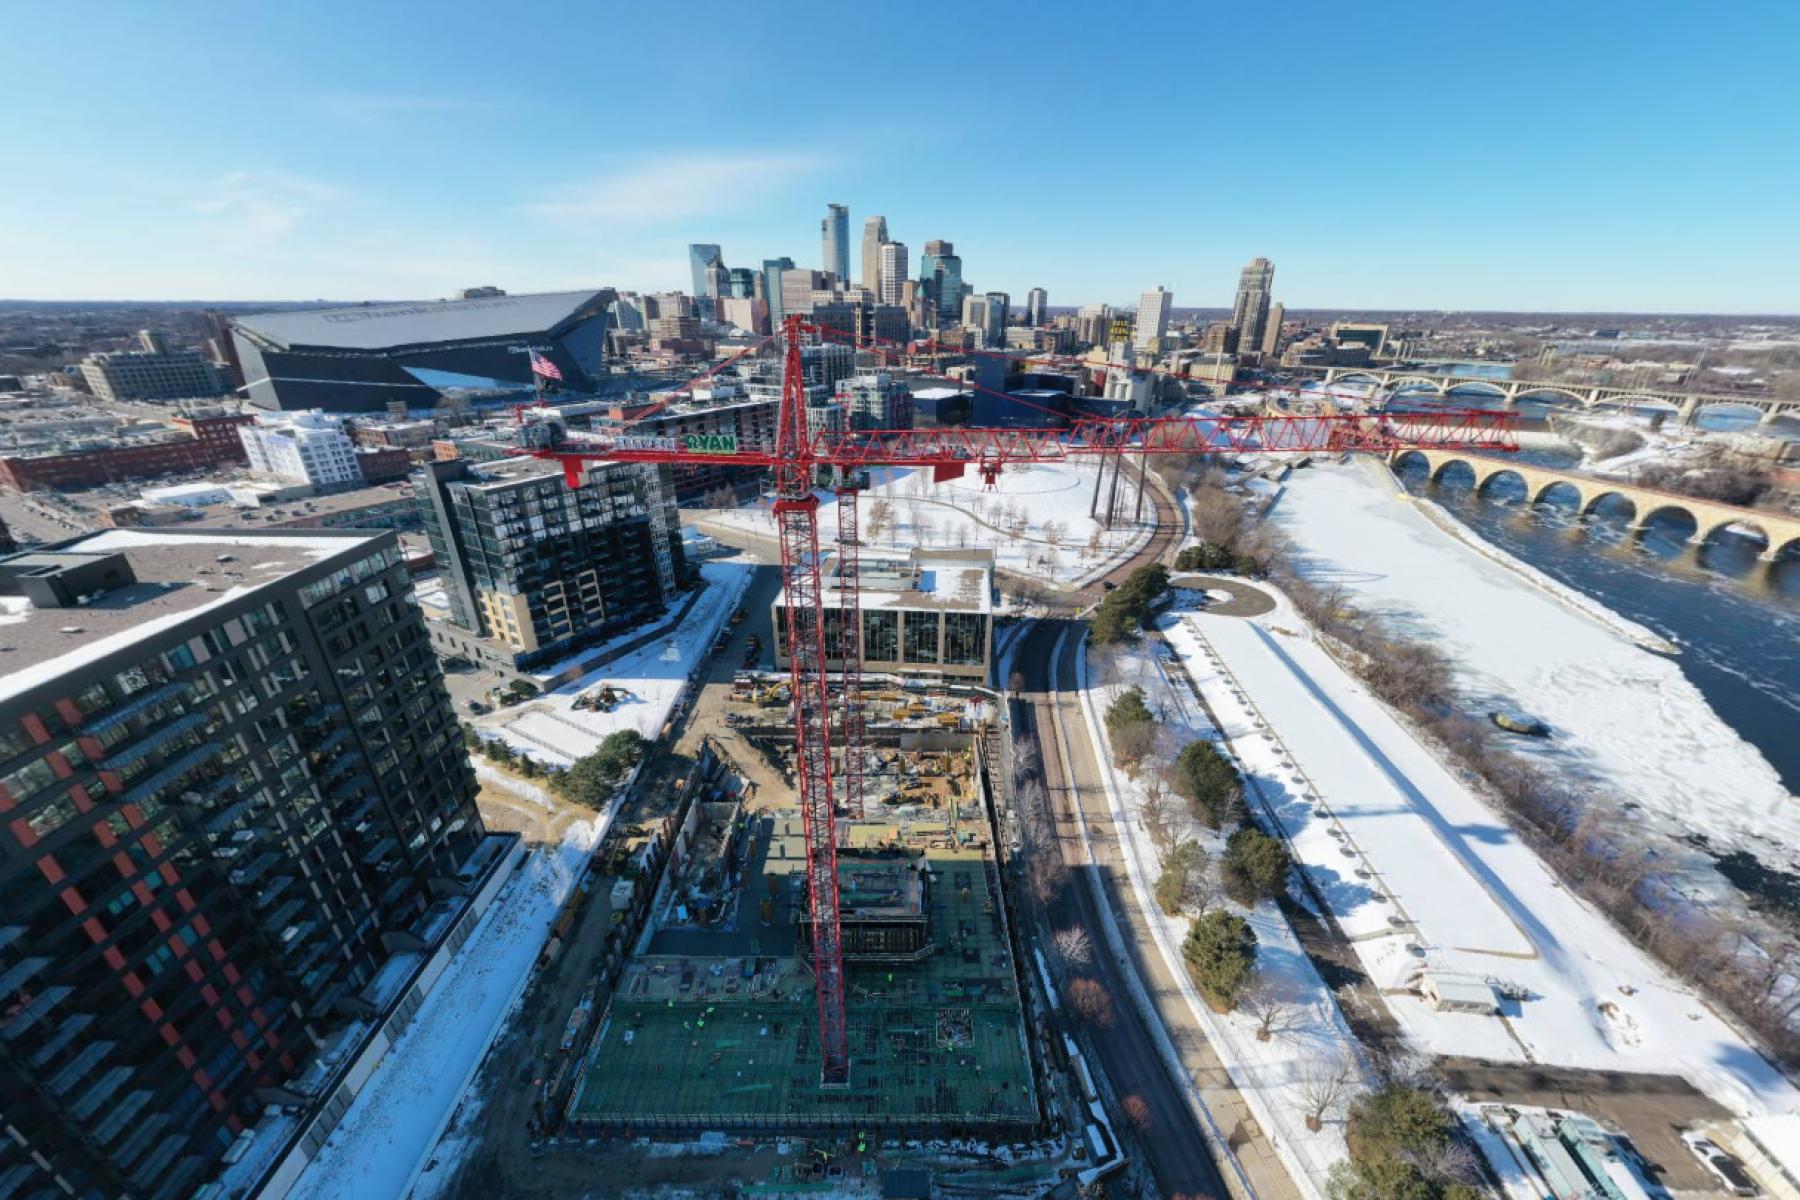 Construction is underway on the 550-foot, 41-story Eleven tower, which will be Minneapolis’ tallest residential tower.